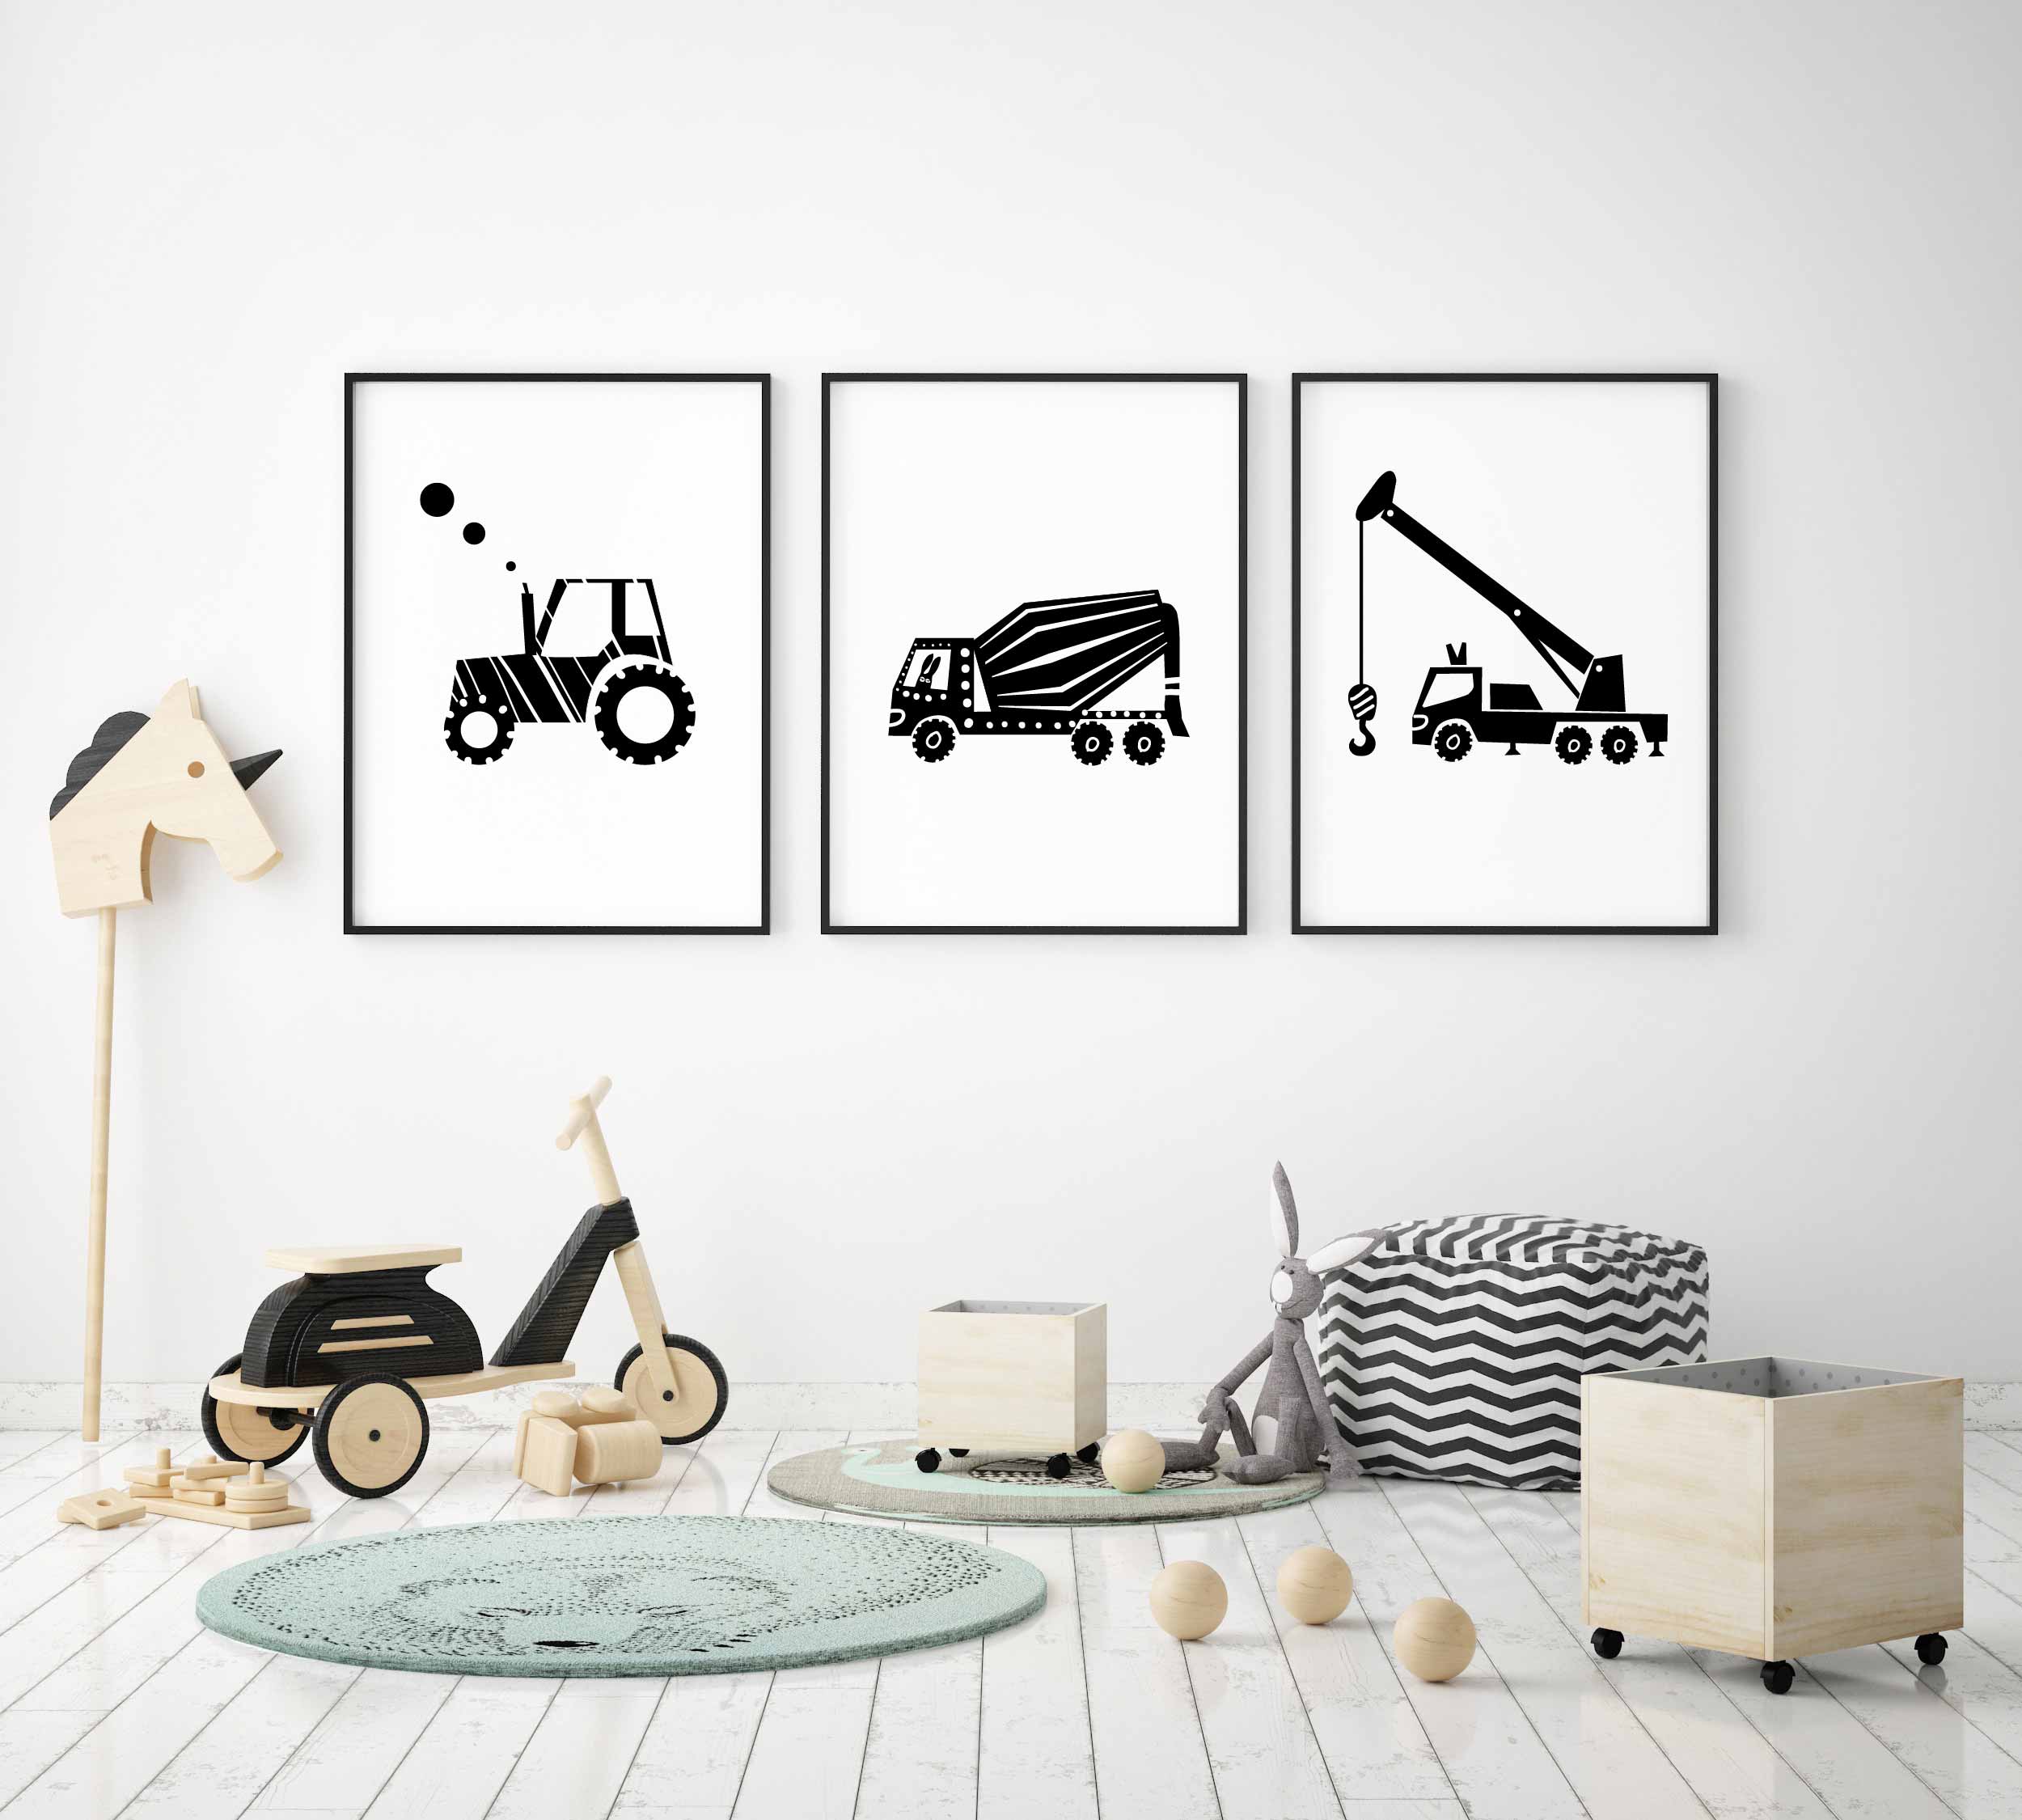 Set of 4 Prints Pictures with Diggers for Boys Bedroom Construction Vehicles 